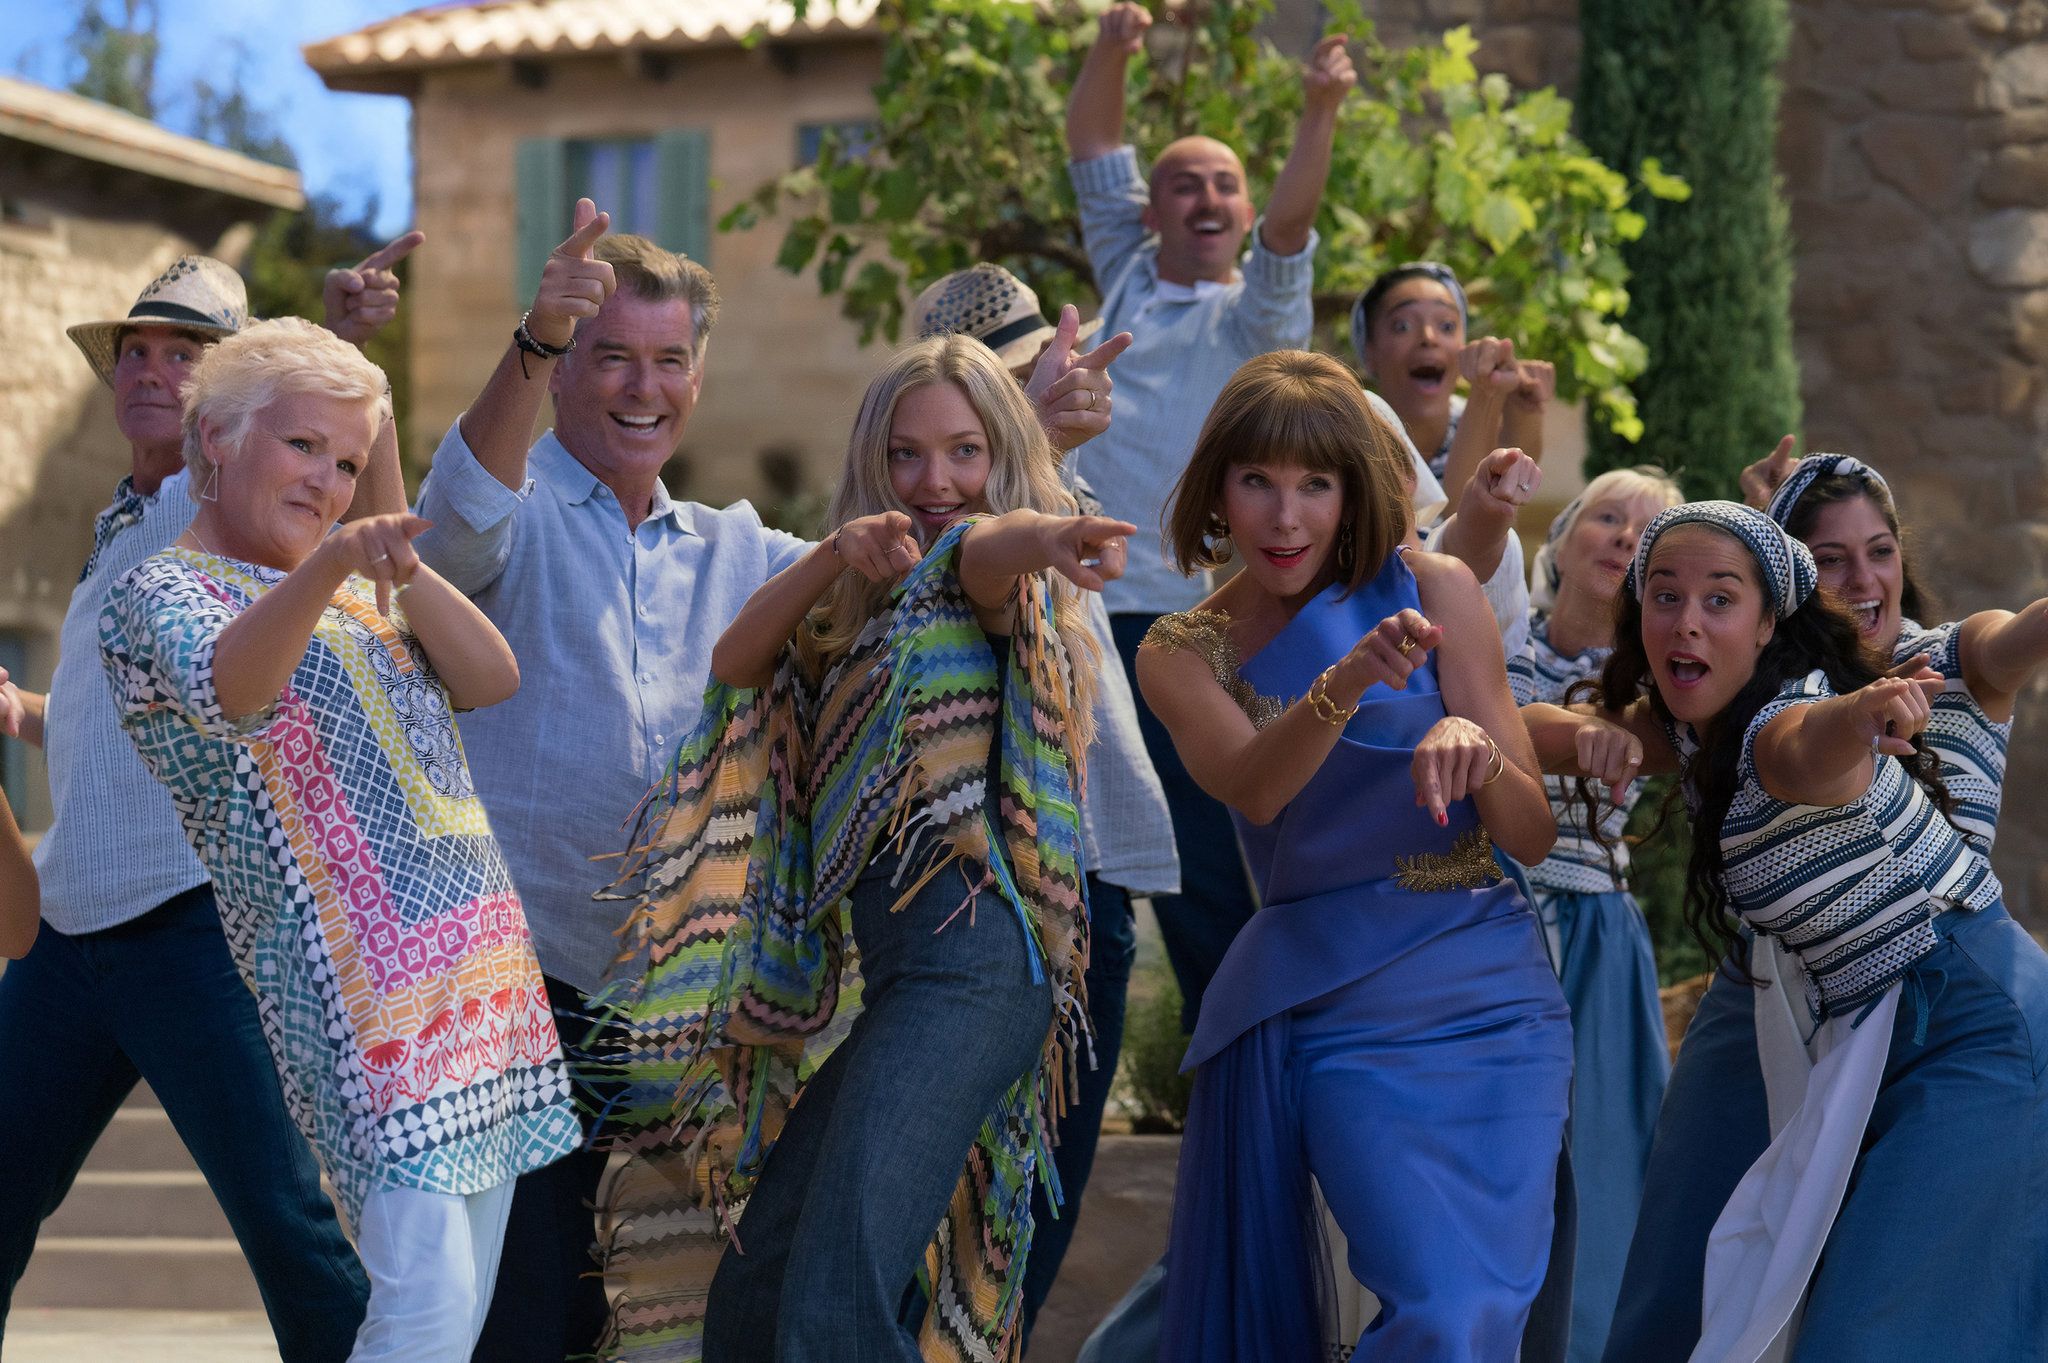 Okay, What's Going On With This Rumored 'Mamma Mia 3'?